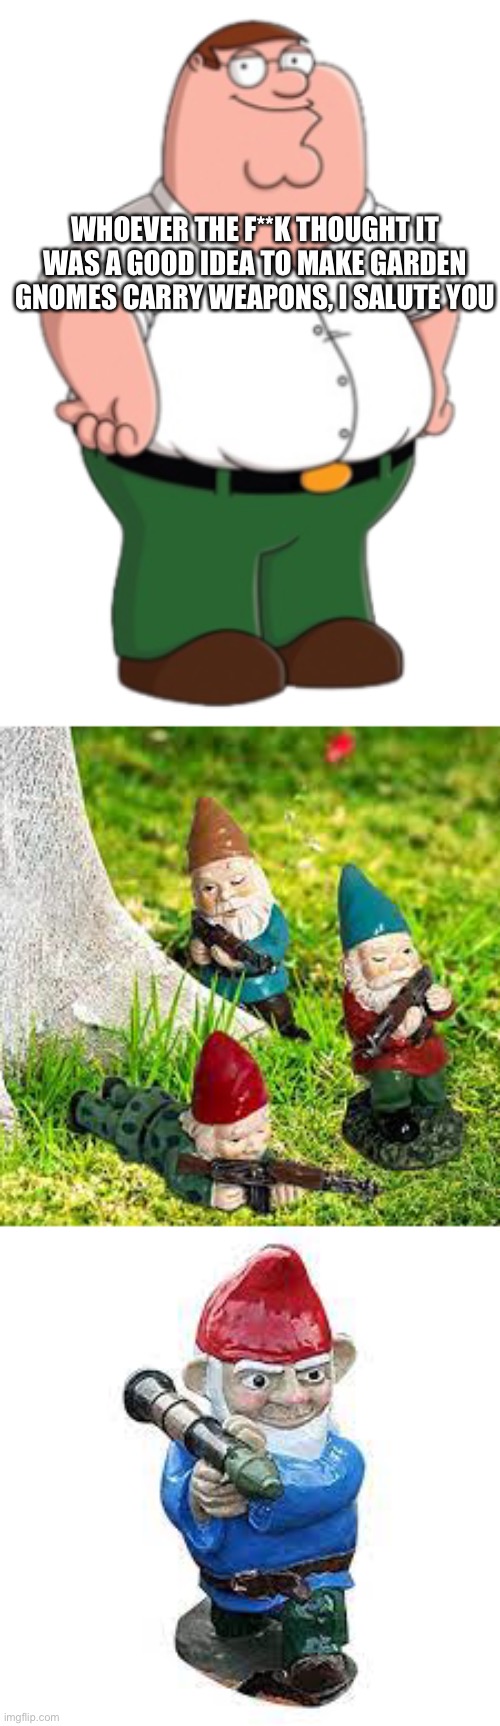 Gnomeo and juliet - The Armageddon | WHOEVER THE F**K THOUGHT IT WAS A GOOD IDEA TO MAKE GARDEN GNOMES CARRY WEAPONS, I SALUTE YOU | image tagged in peter griffin | made w/ Imgflip meme maker